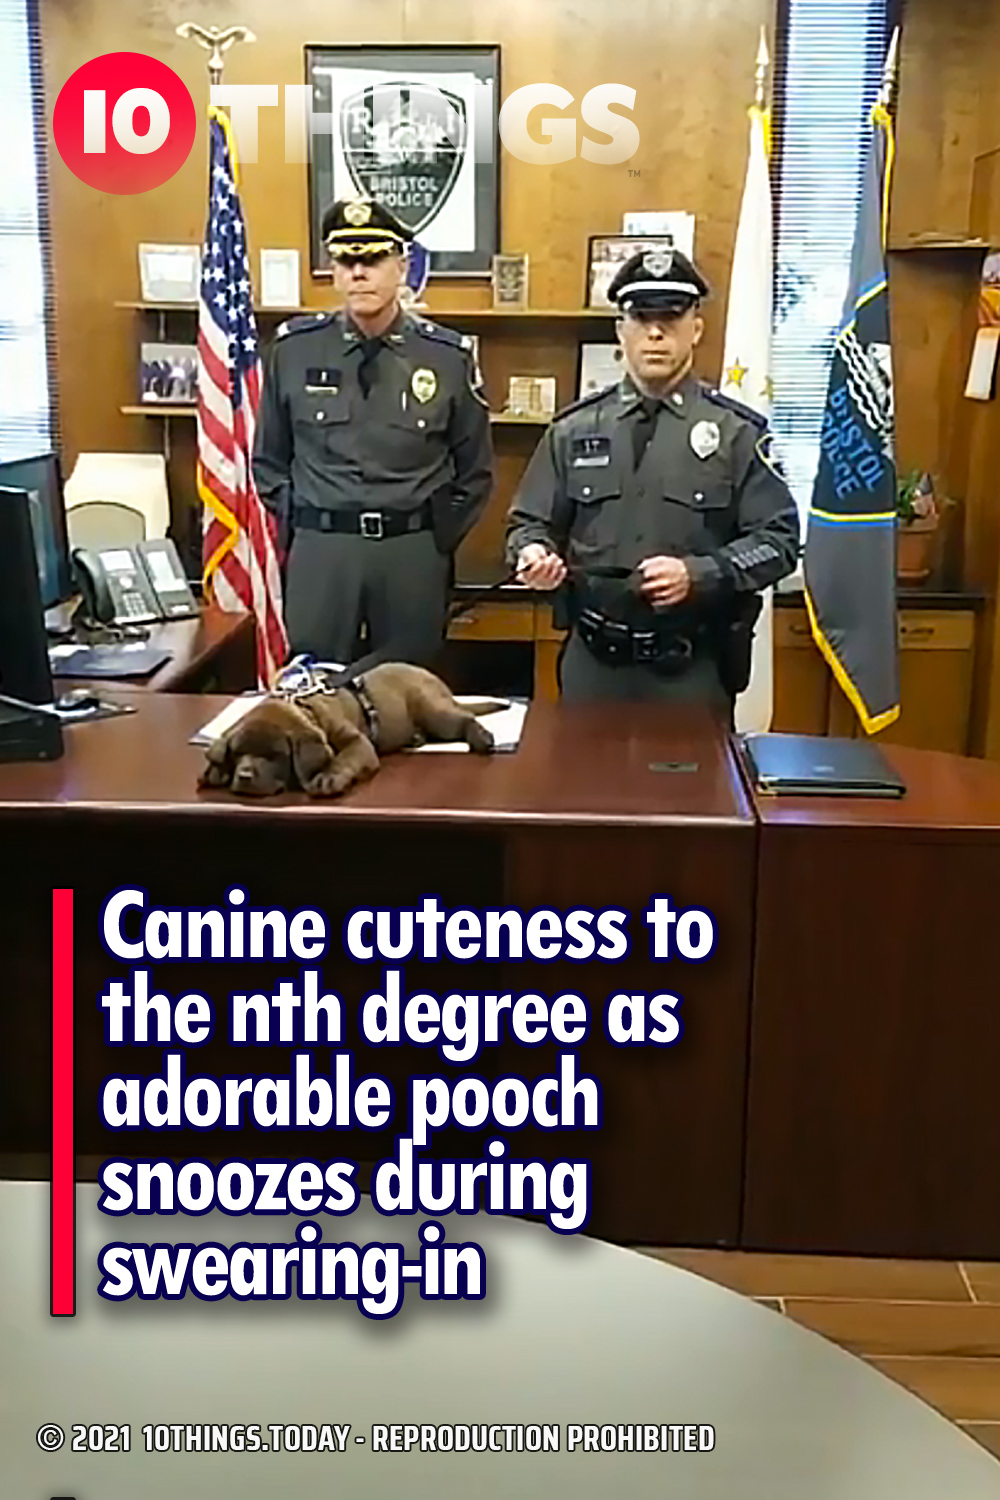 Canine cuteness to the nth degree as adorable pooch snoozes during swearing-in